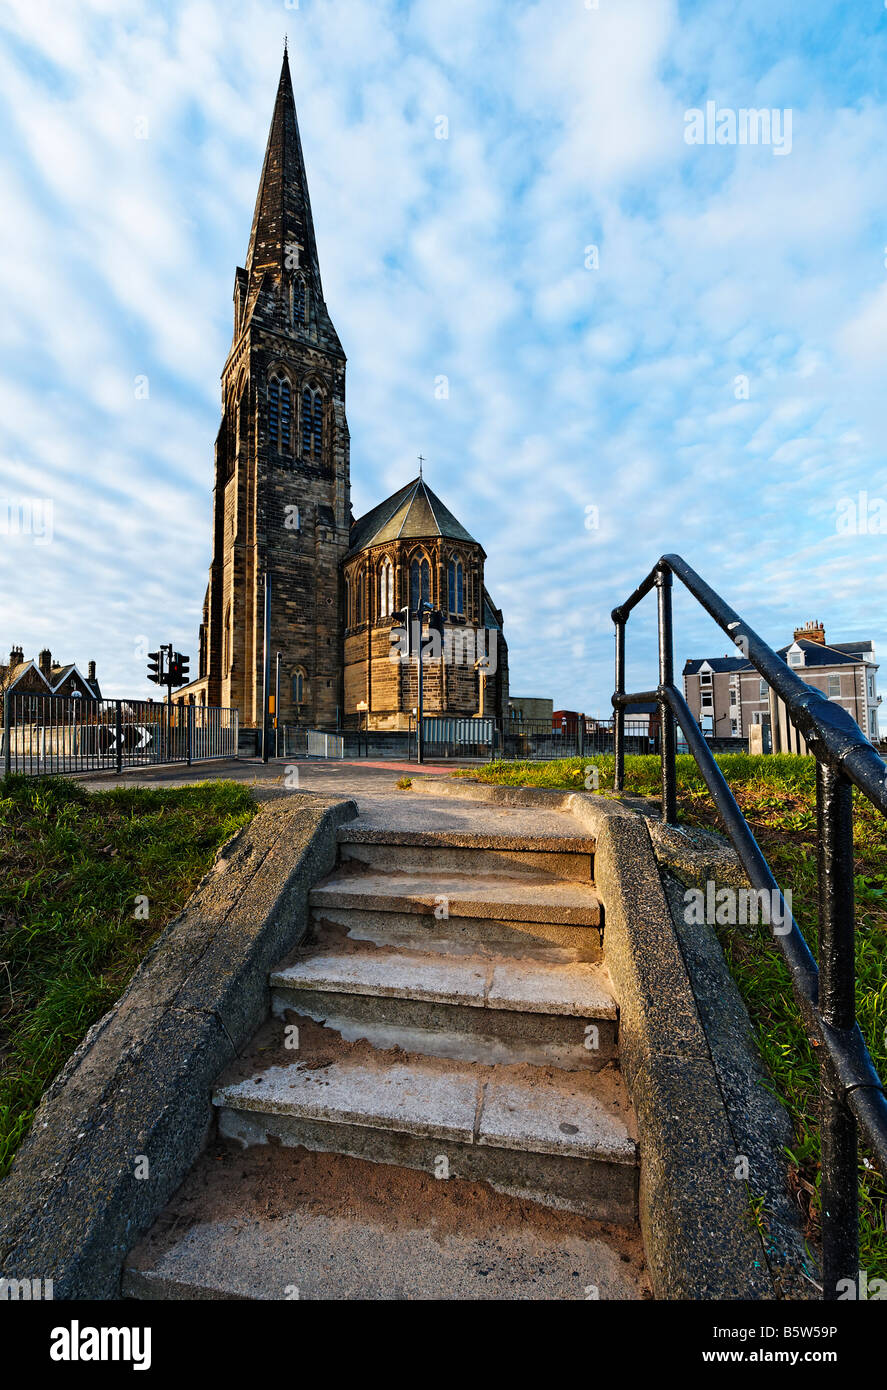 St George's Church Cullercoats Stock Photo